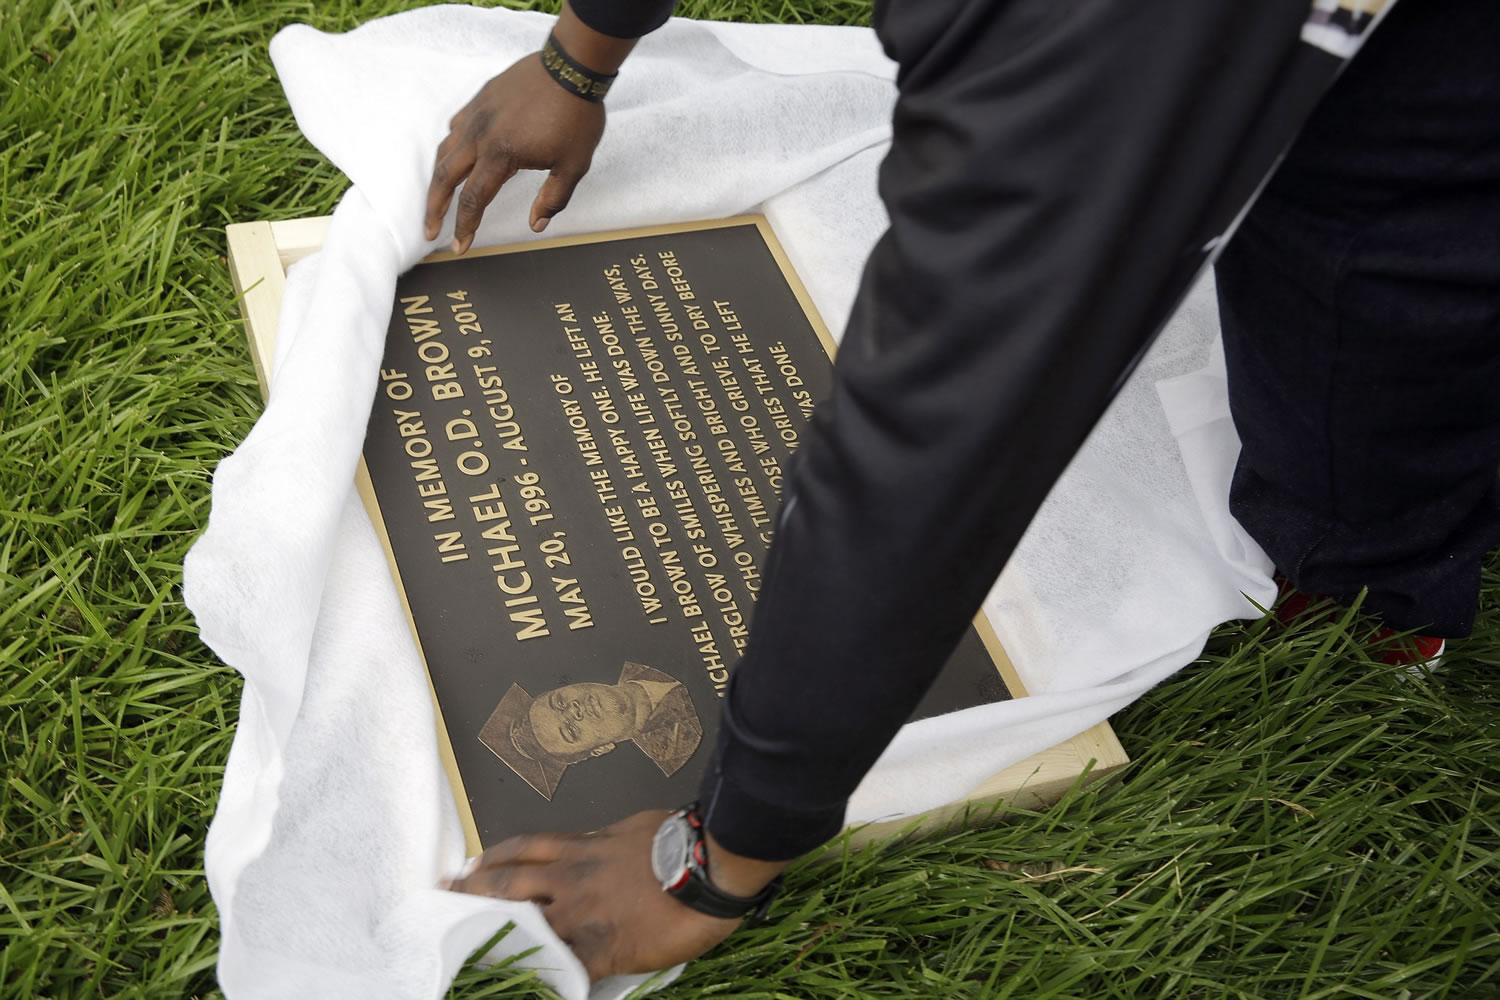 Michael Brown Sr. on May 20  unwraps a plaque remembering his son, Michael Brown, to show volunteers as they remove items left at a makeshift memorial to Michael Brown in Ferguson, Mo. The one year anniversary of the shooting of Michael Brown, which sparked months of nationwide protests and launched the &quot;Black Lives Matter&quot; movement, is on Sunday, Aug. 9.